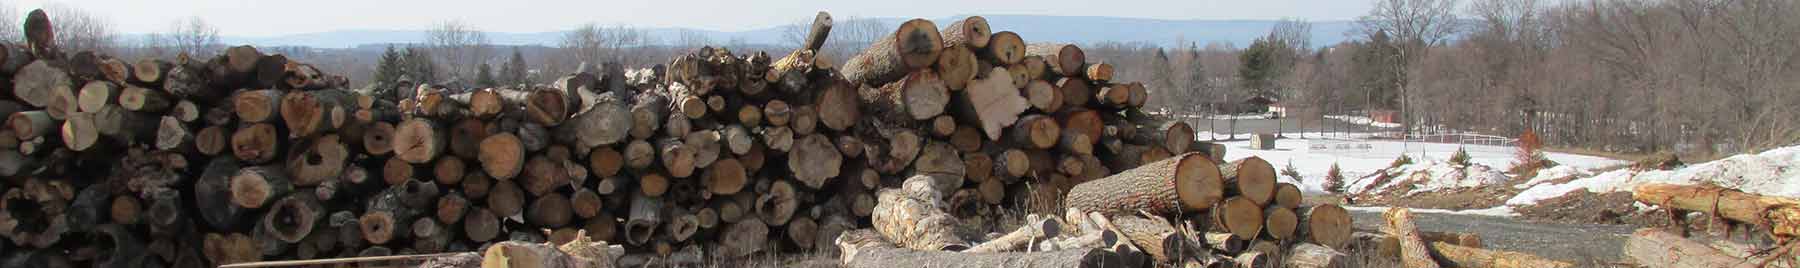 stack of large logs